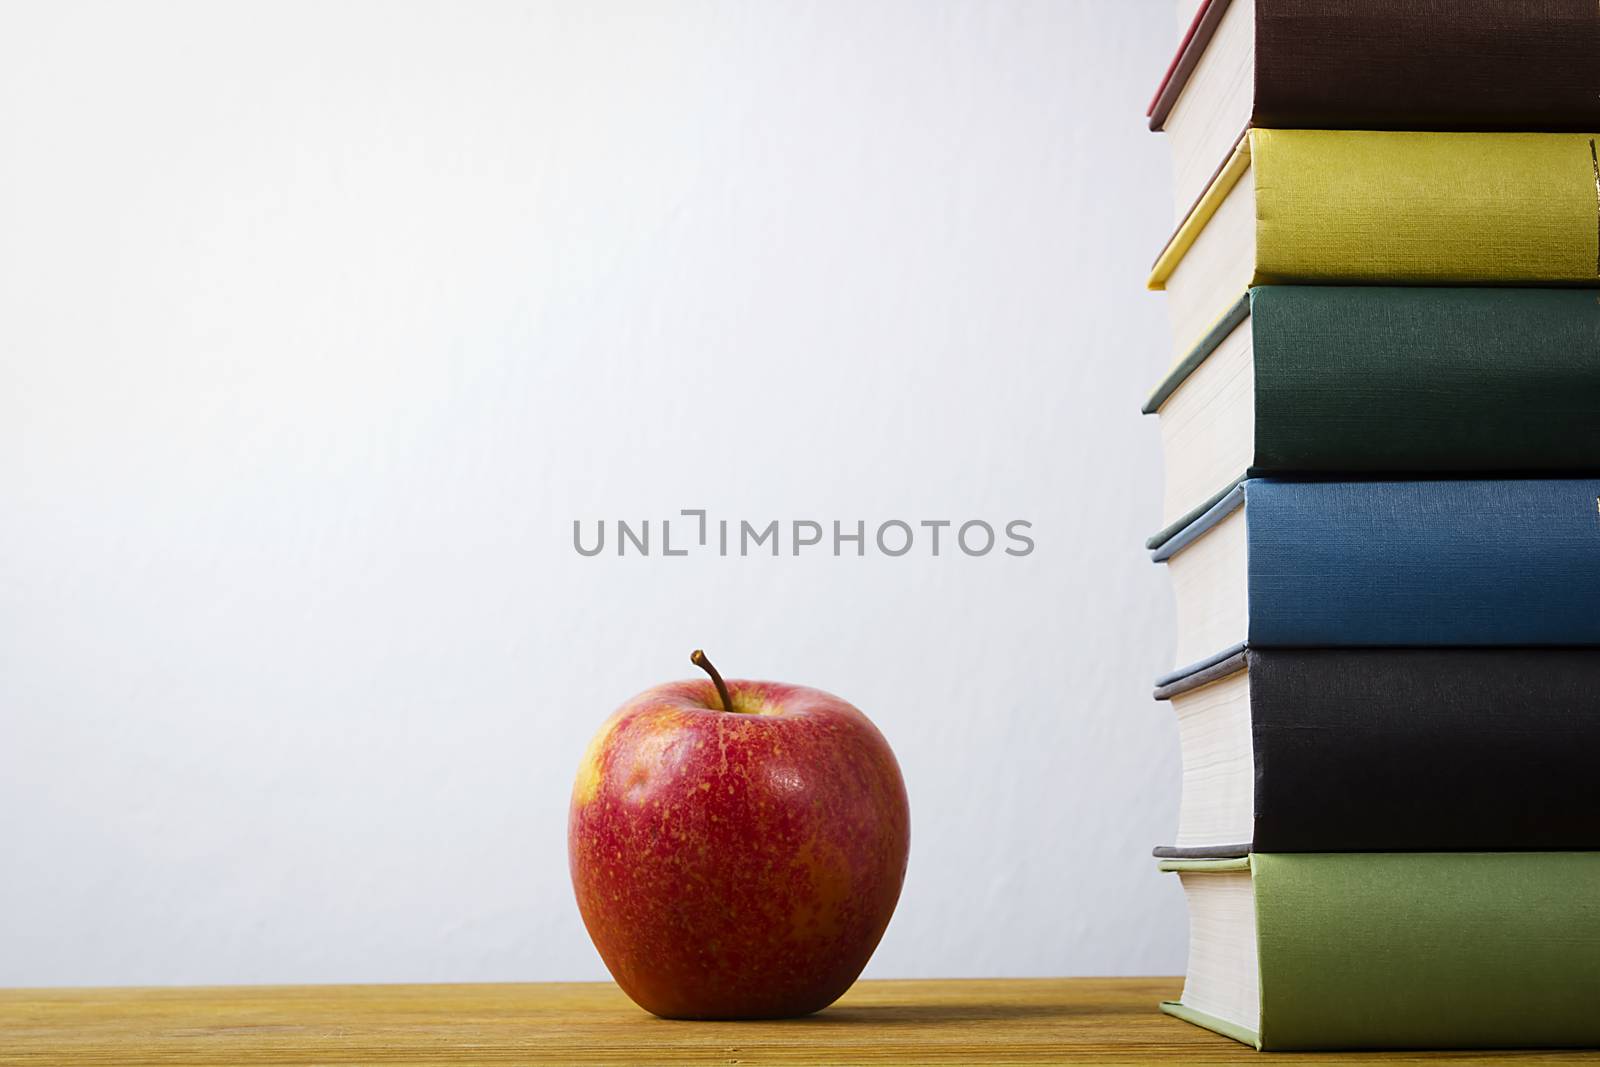 Stack of books with multi-colored binders and an apple on a wooden table